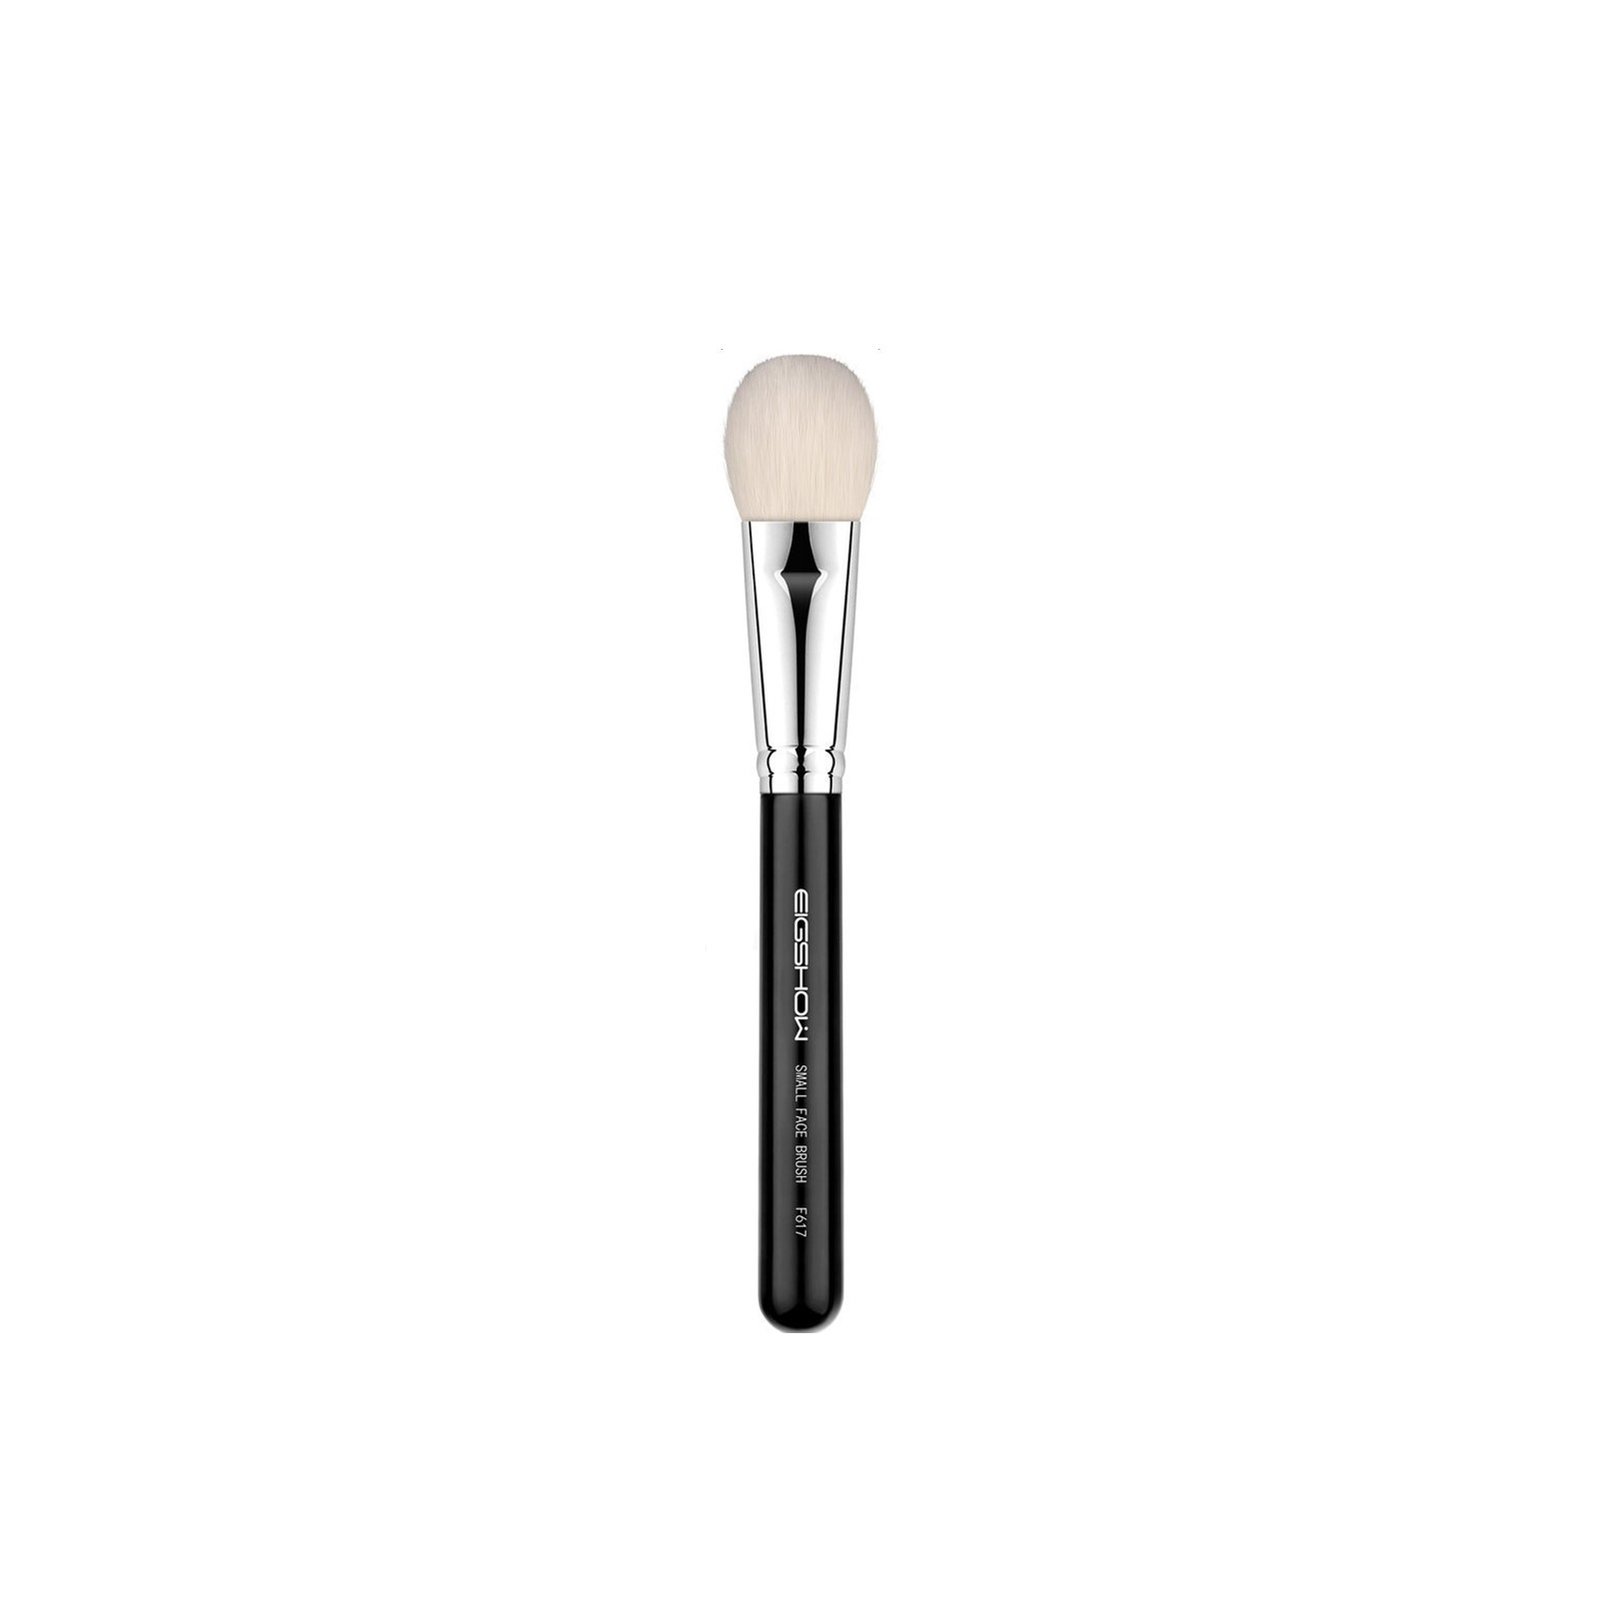 Eigshow Beauty Small Face Brush F617